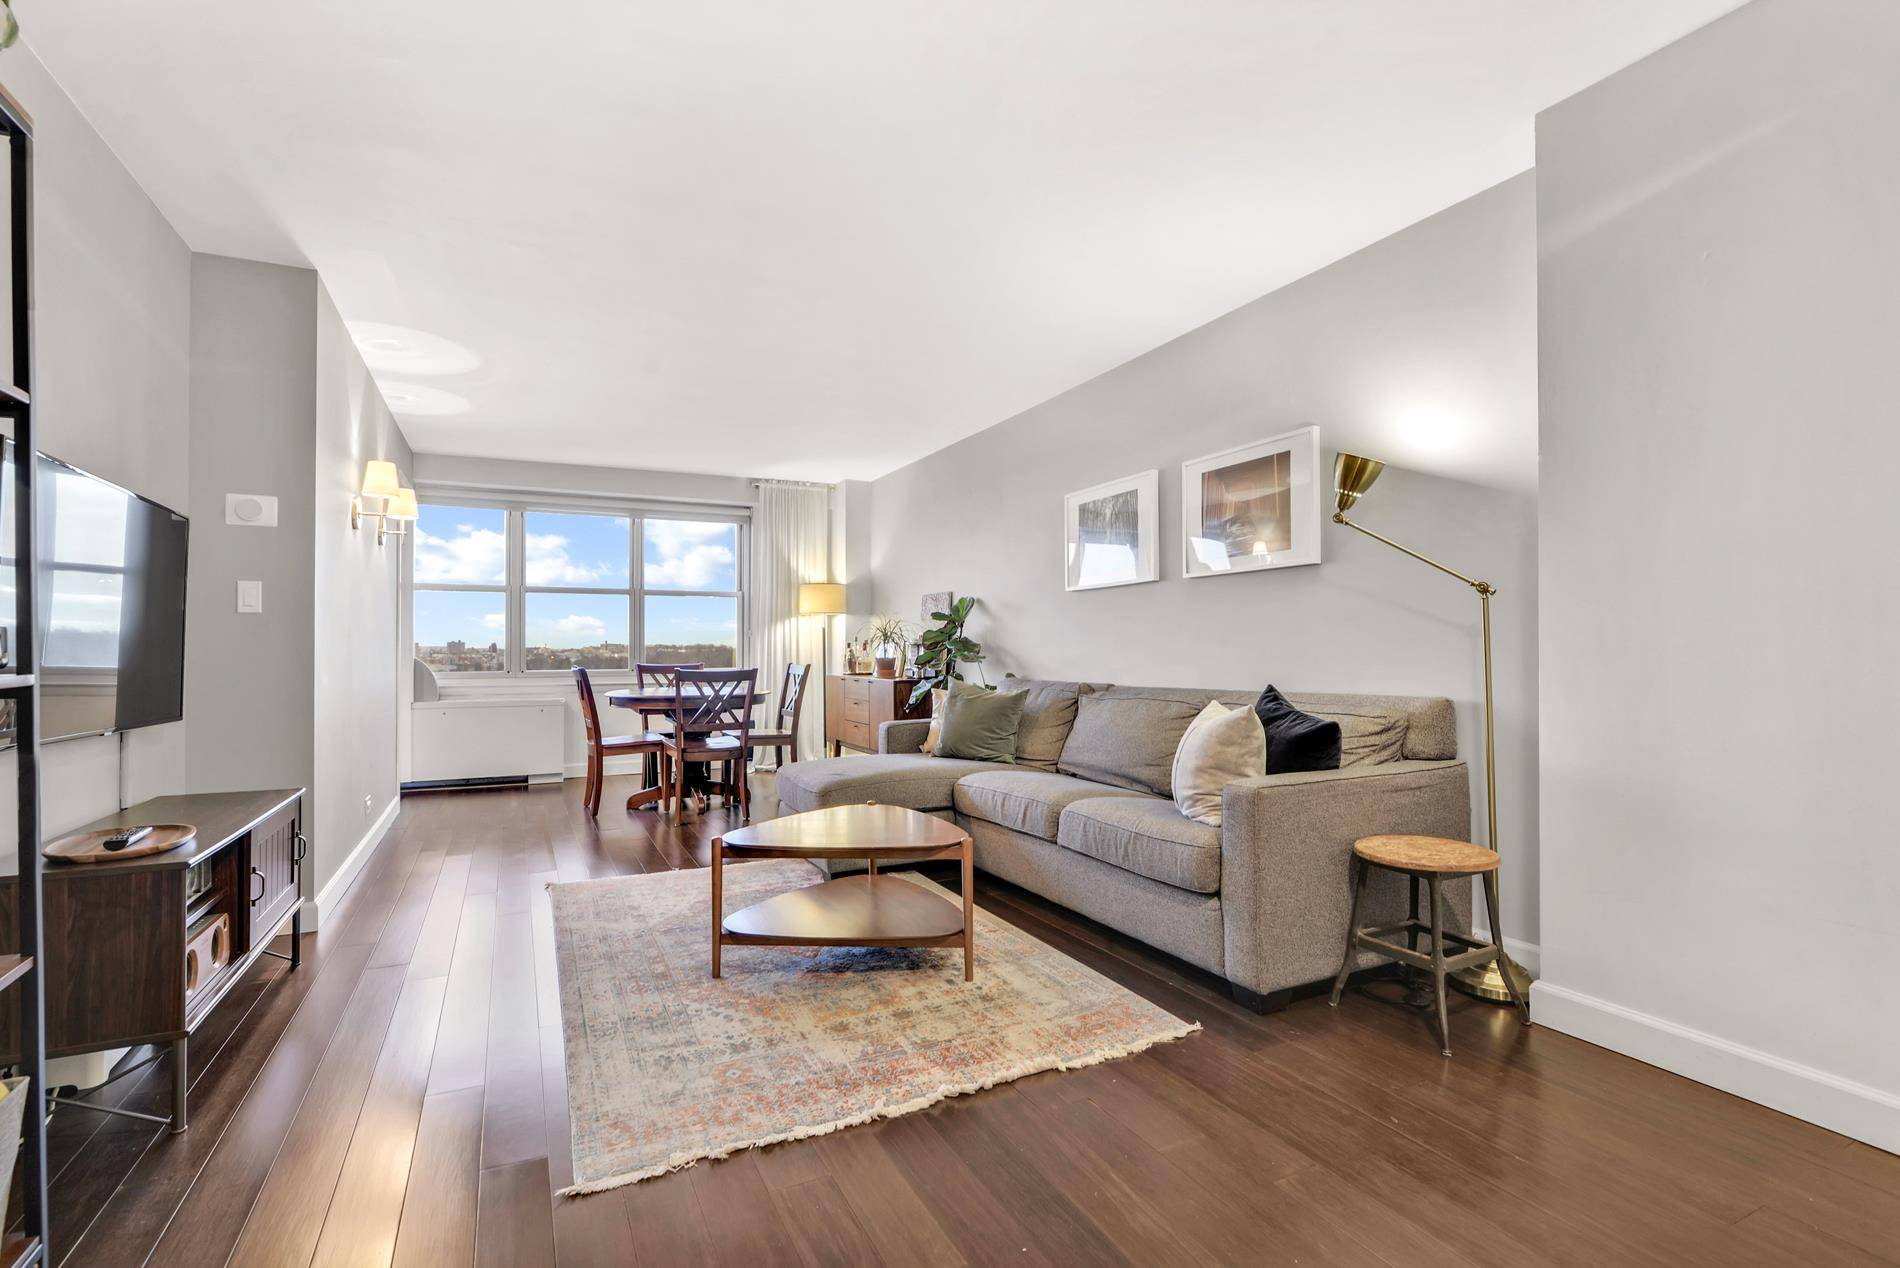 PENTHOUSE LEVEL, FULL SERVICE AND EXPANSIVE VIEWSWelcome to apartment 17L, a luxuriously appointed top floor two bedroom apartment with sweeping views at Caton Towers, a leading Brooklyn coop building with ...